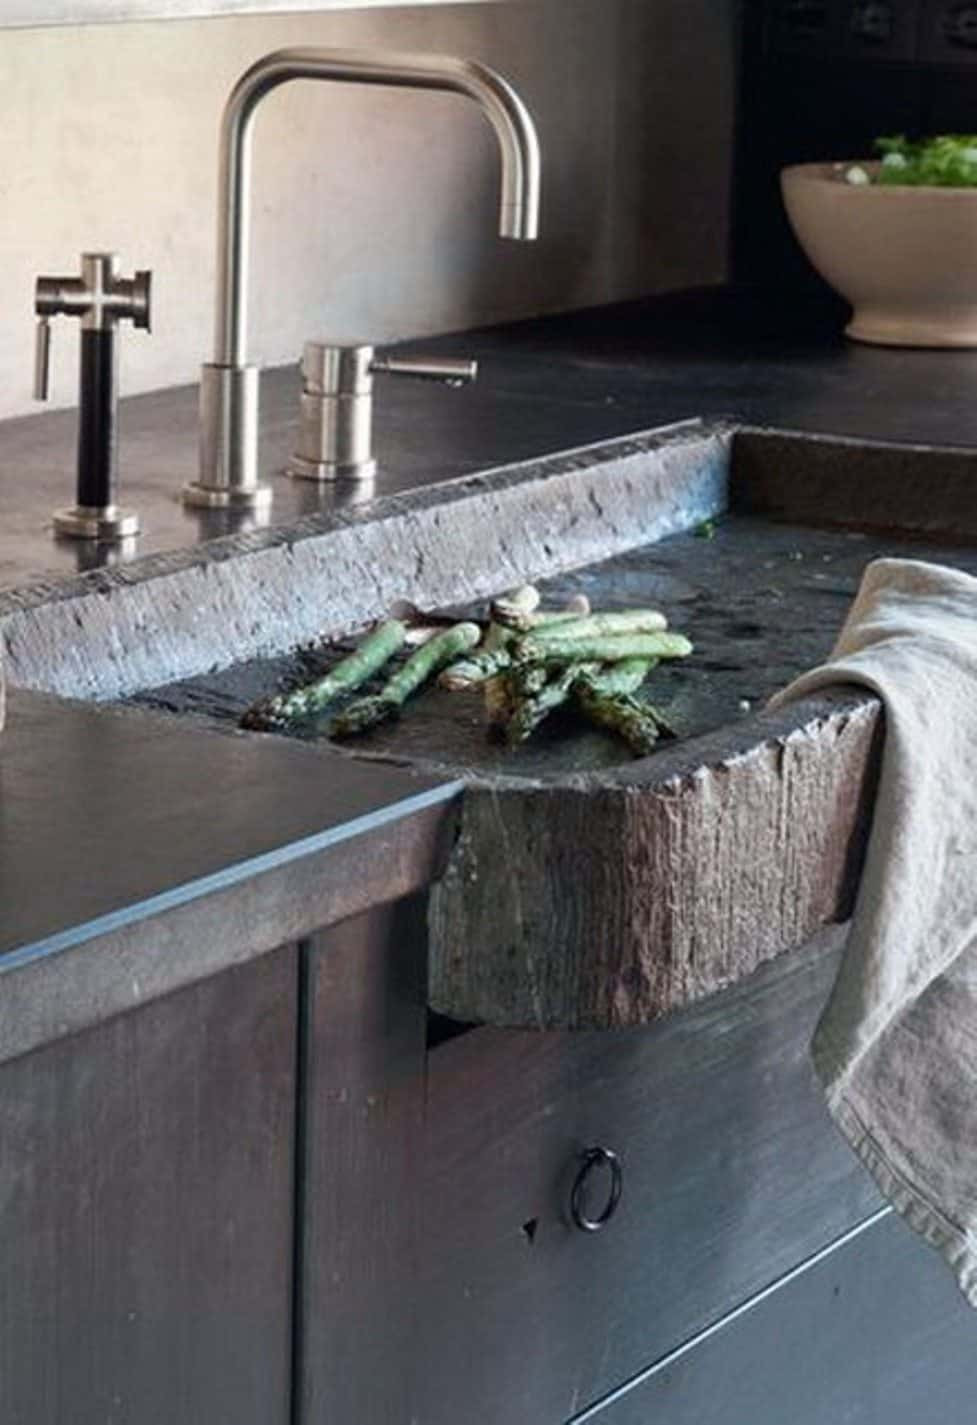 Rustic Kitchen Sink
 Rustic Modern Kitchen Features Modern Faucet And Hammered